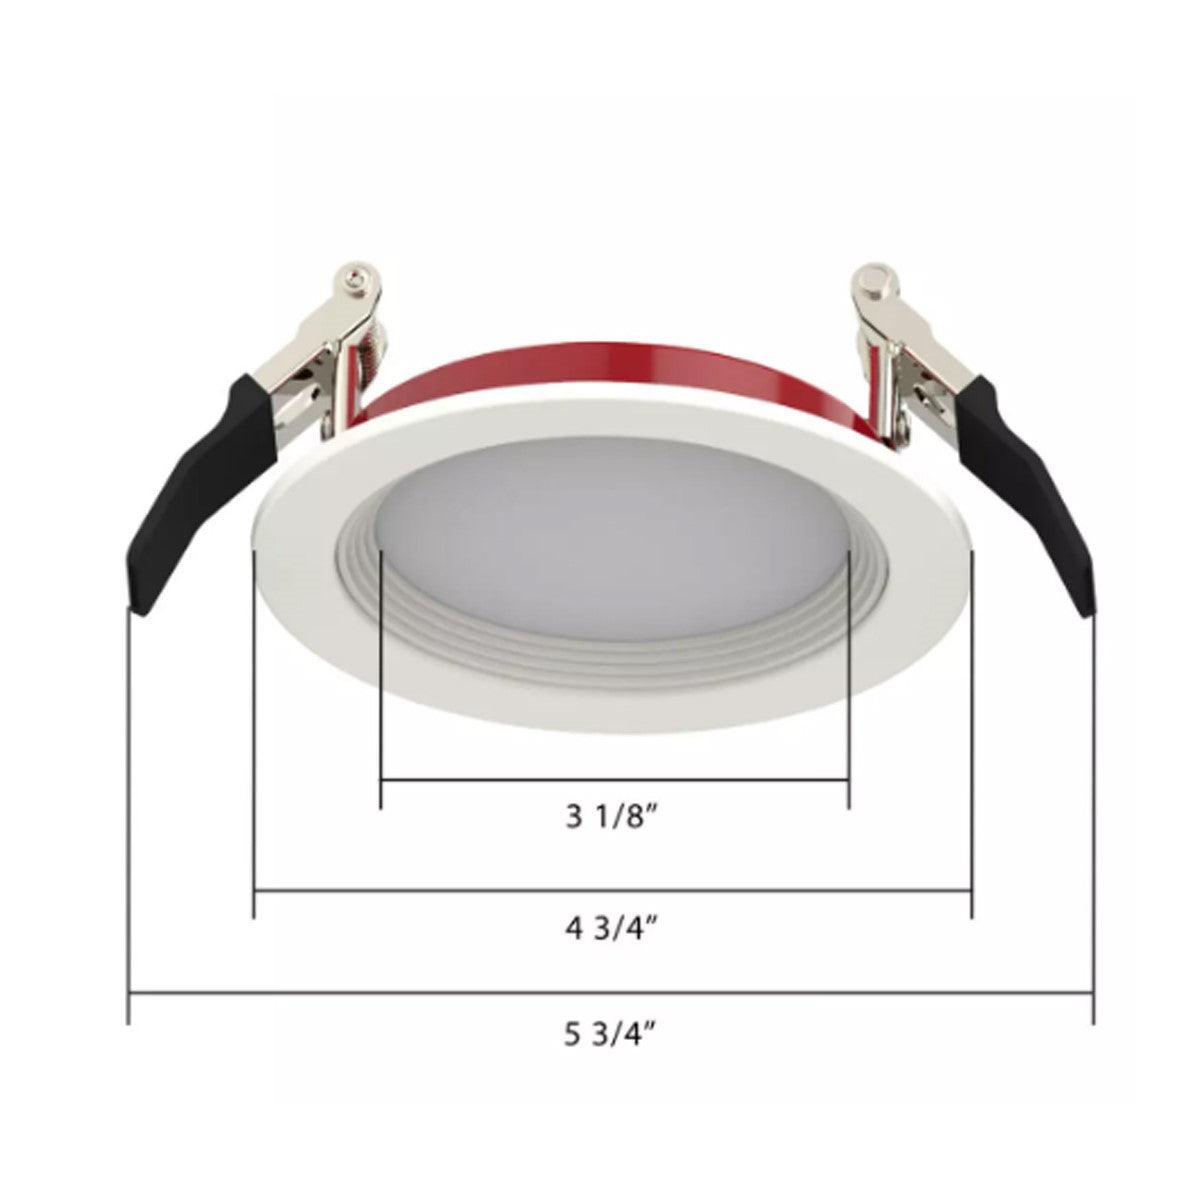 4 In. Edge-Lit Fire Resistant Wafer Canless LED Downlight, 11 Watt, 1000 Lumens, Selectable CCT, 2700K to 5000K, Baffle Trim